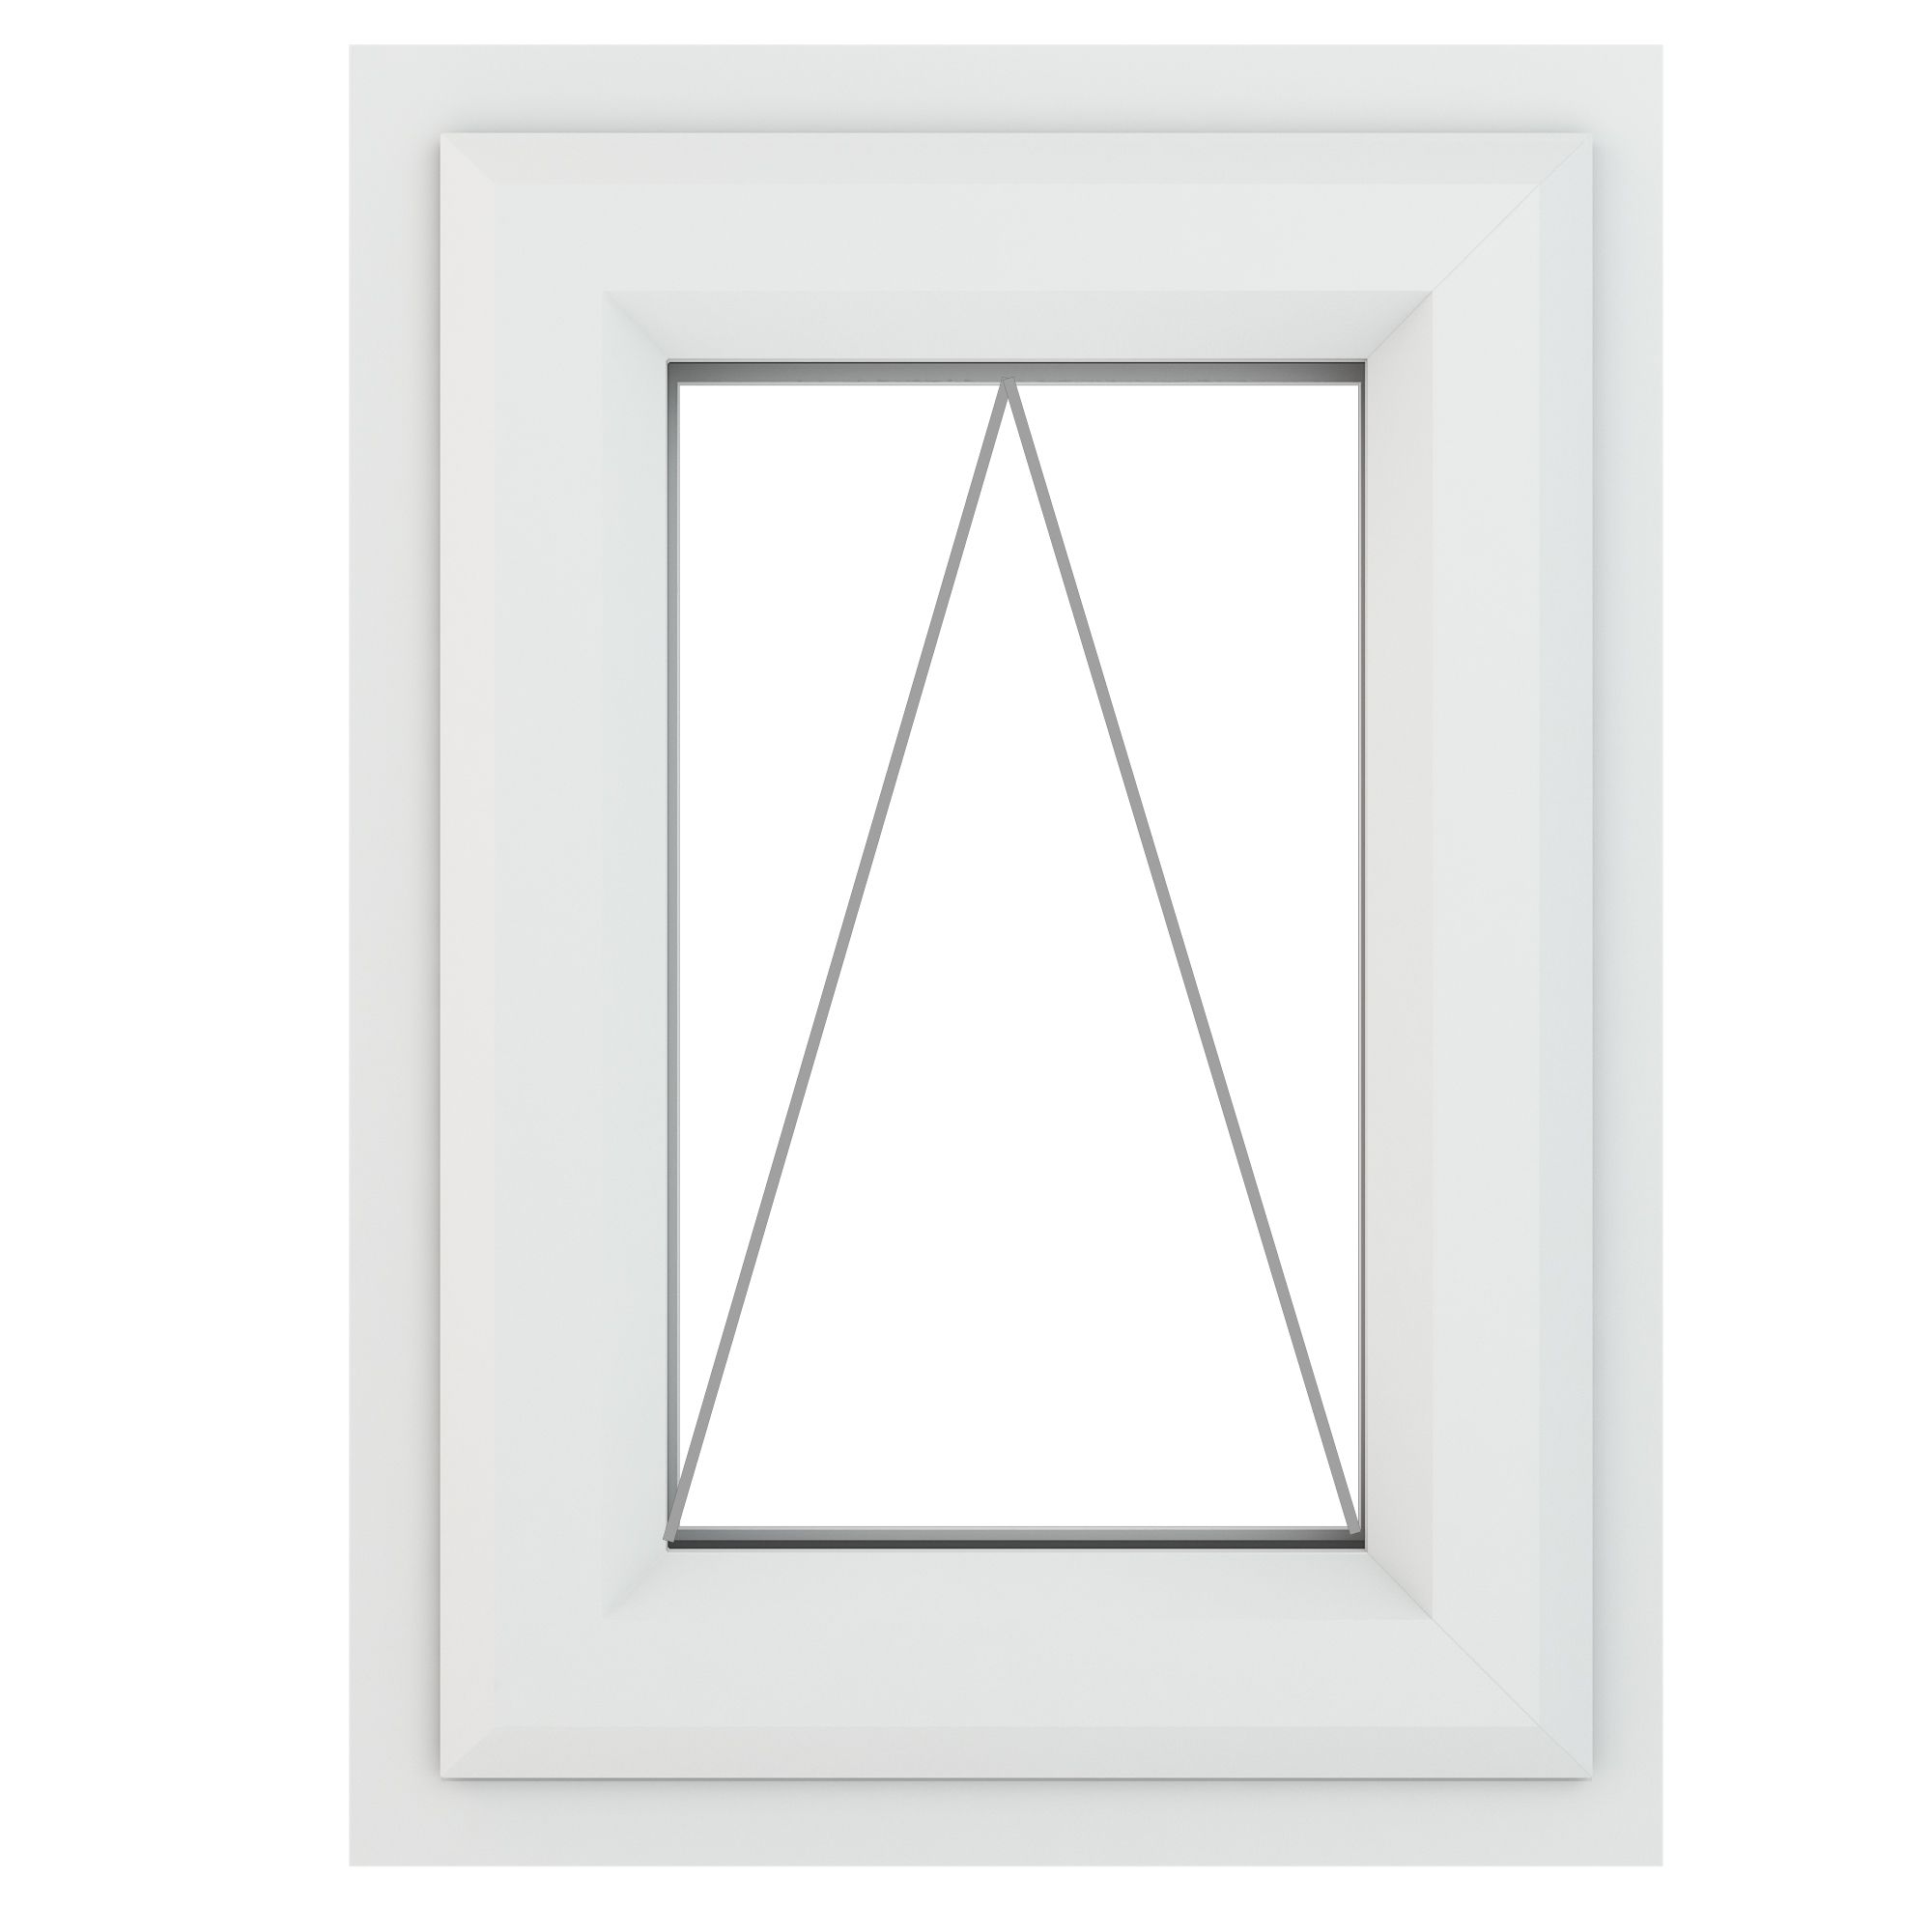 Fortia 1P Clear Glazed White uPVC Top hung Window, (H)610mm (W)440mm